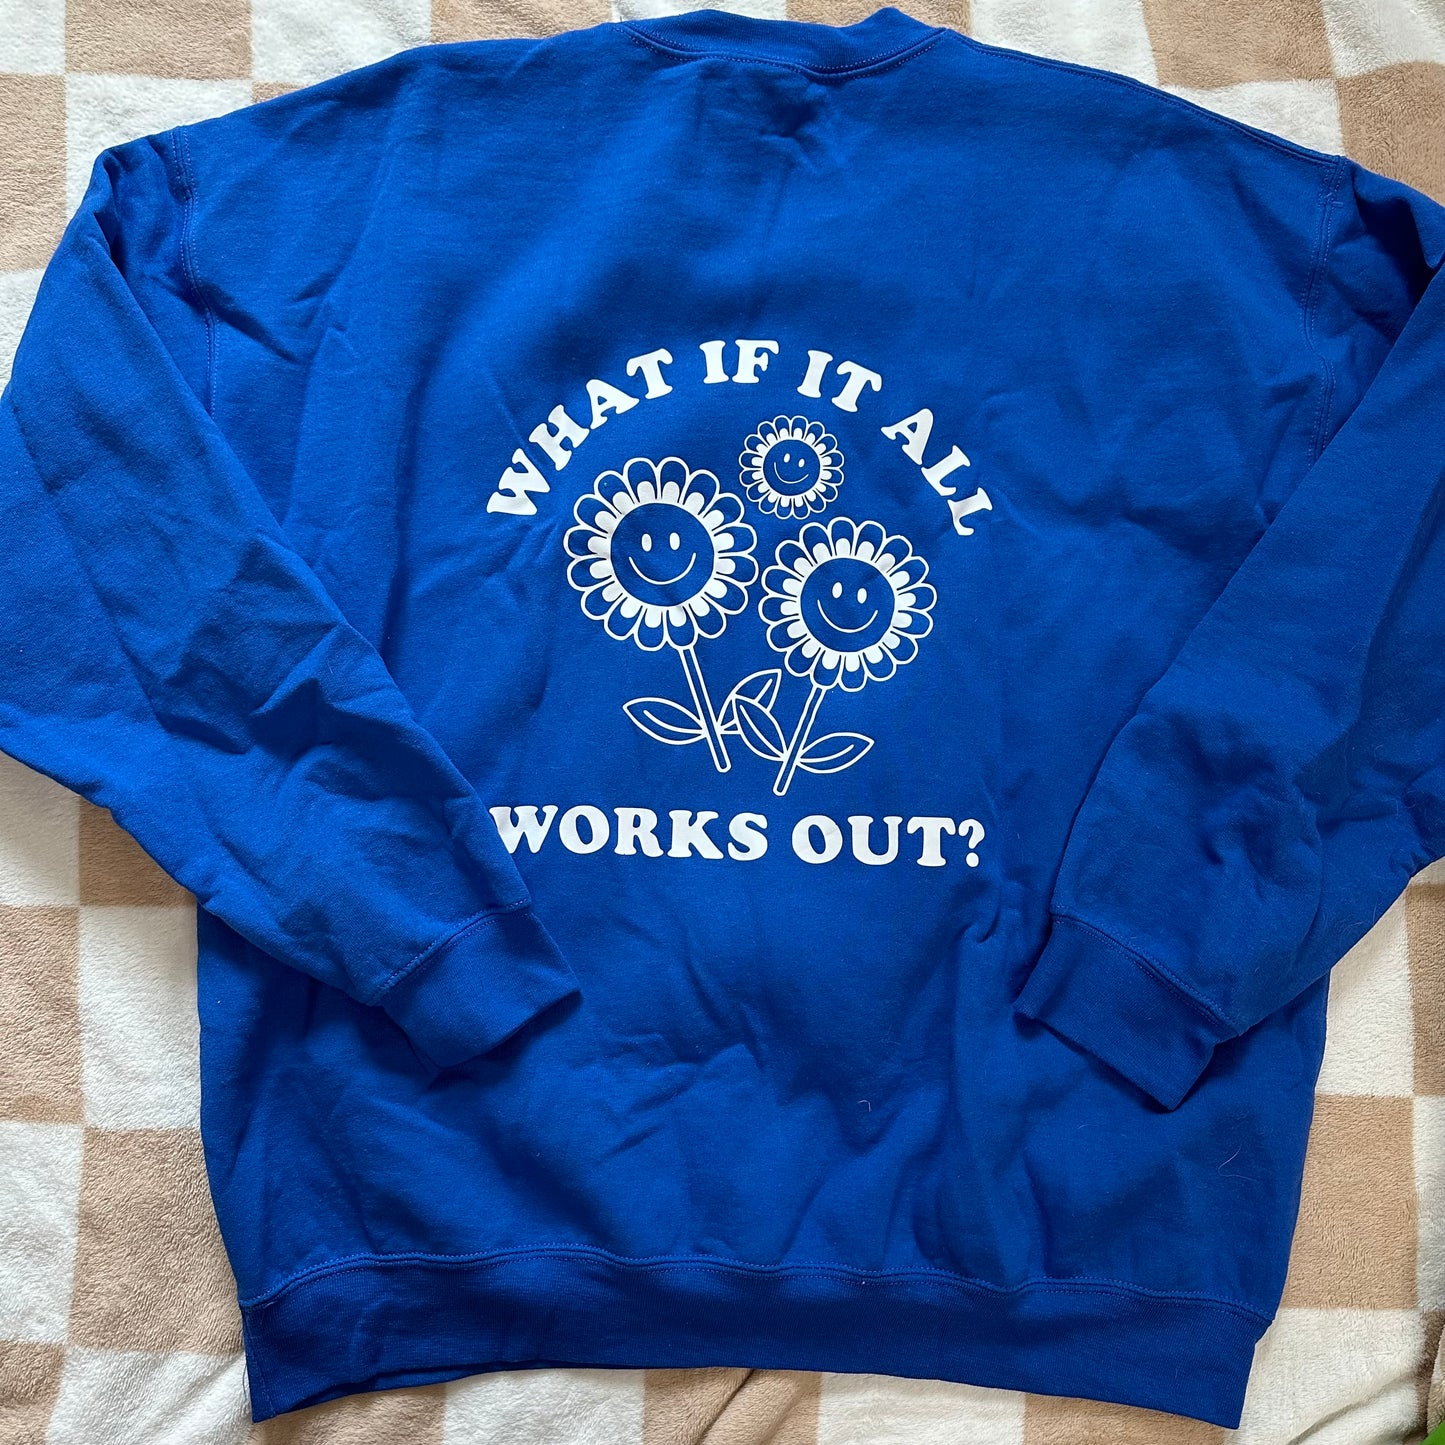 What If It Works Out - XL - No Flaws